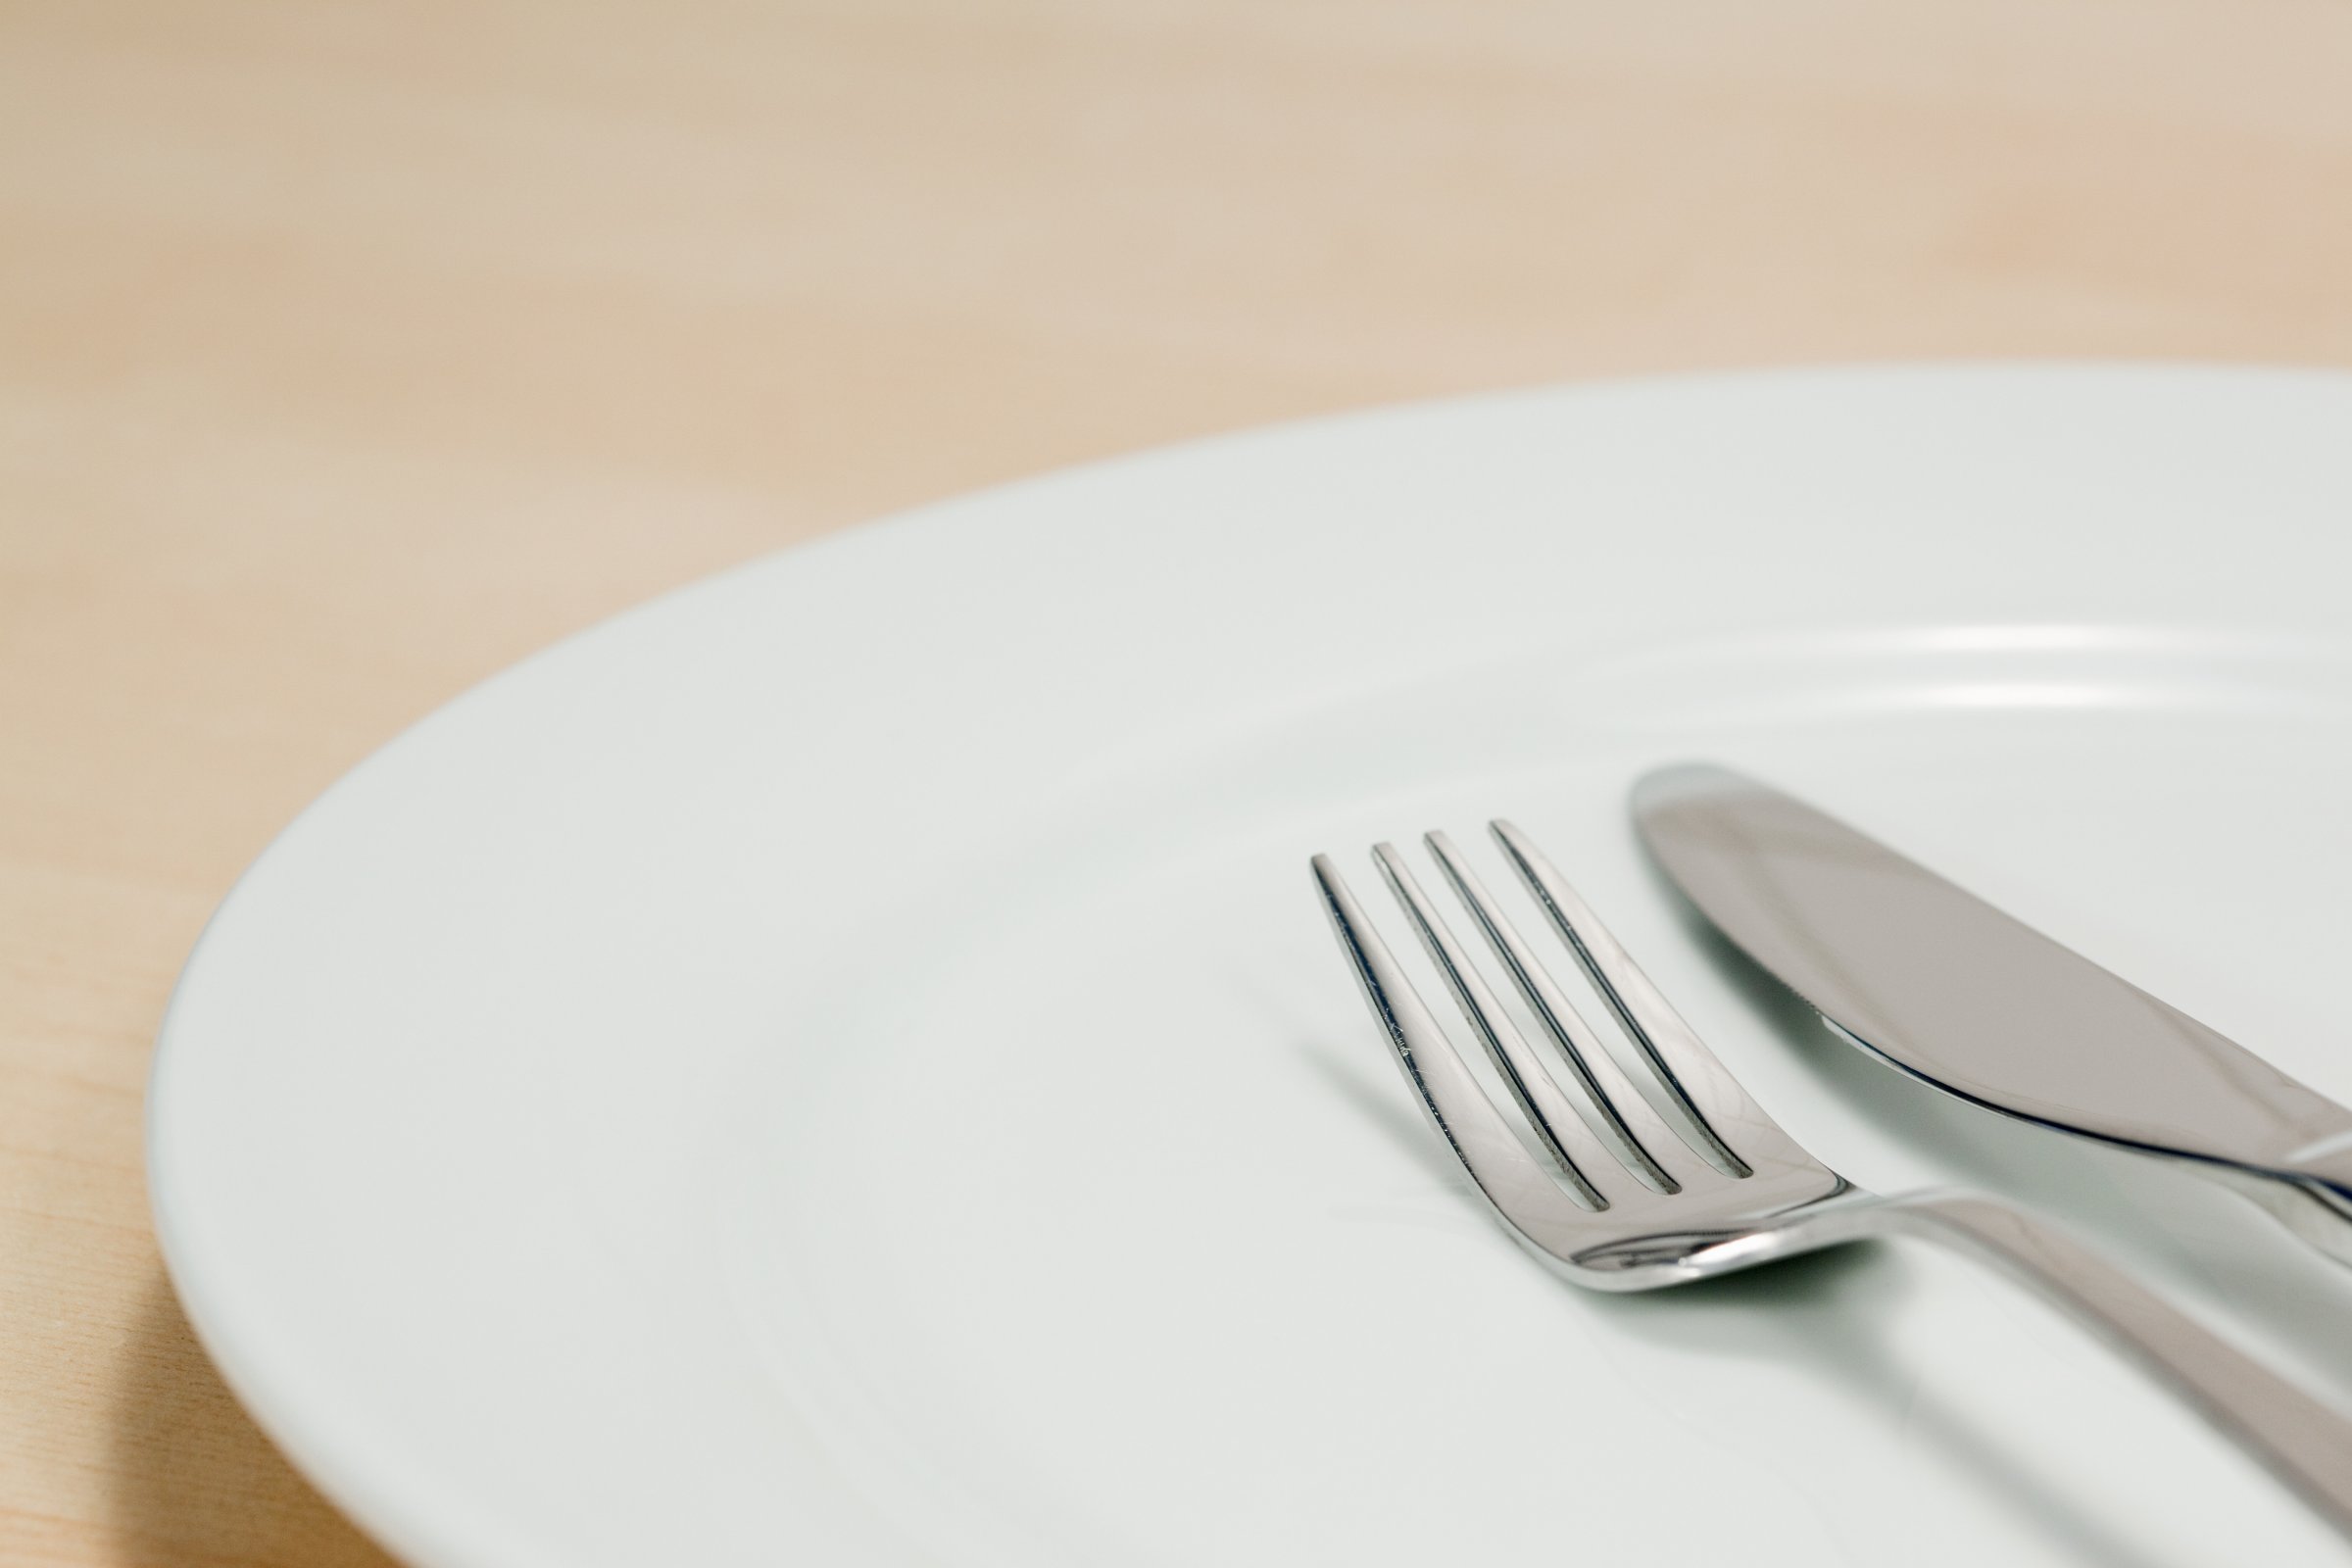 Empty plate with knife and fork